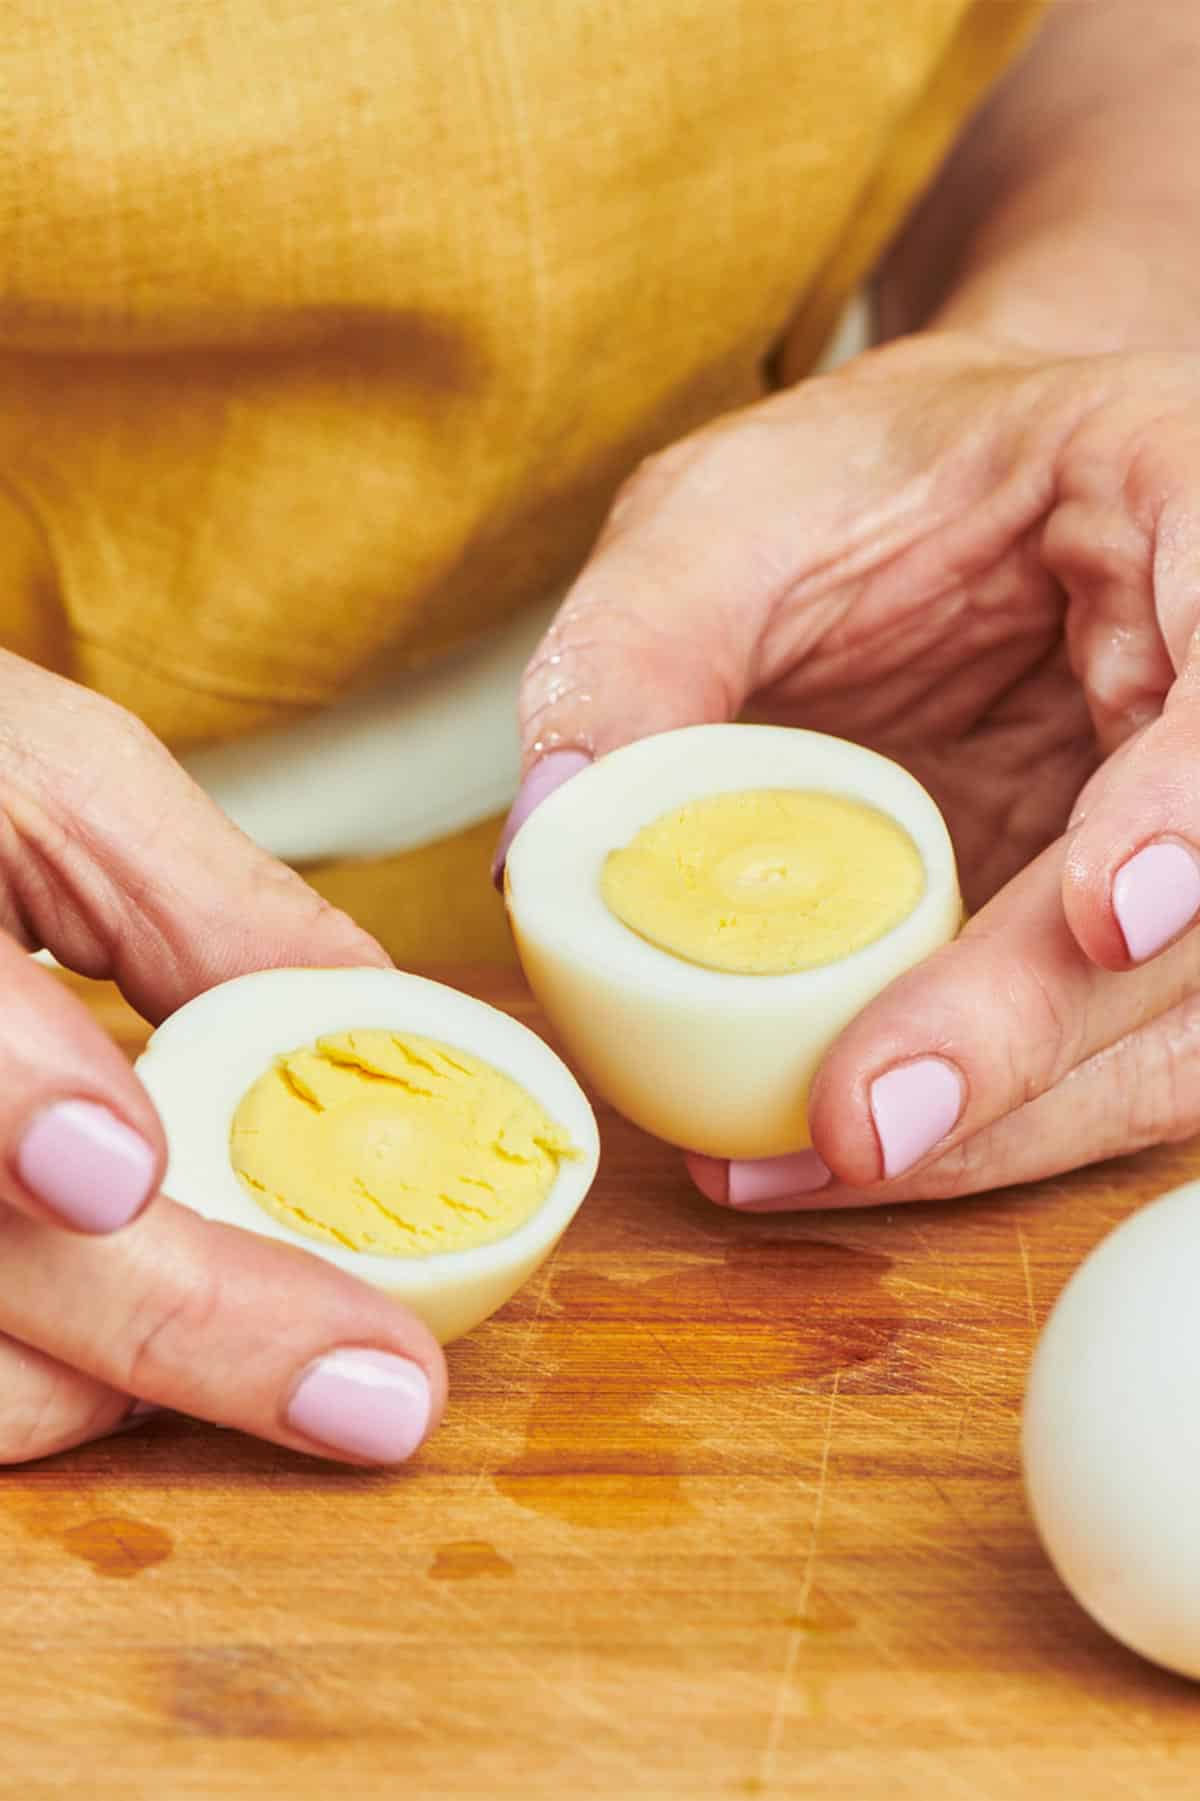 Woman holding cut hard-cooked egg on cutting board.